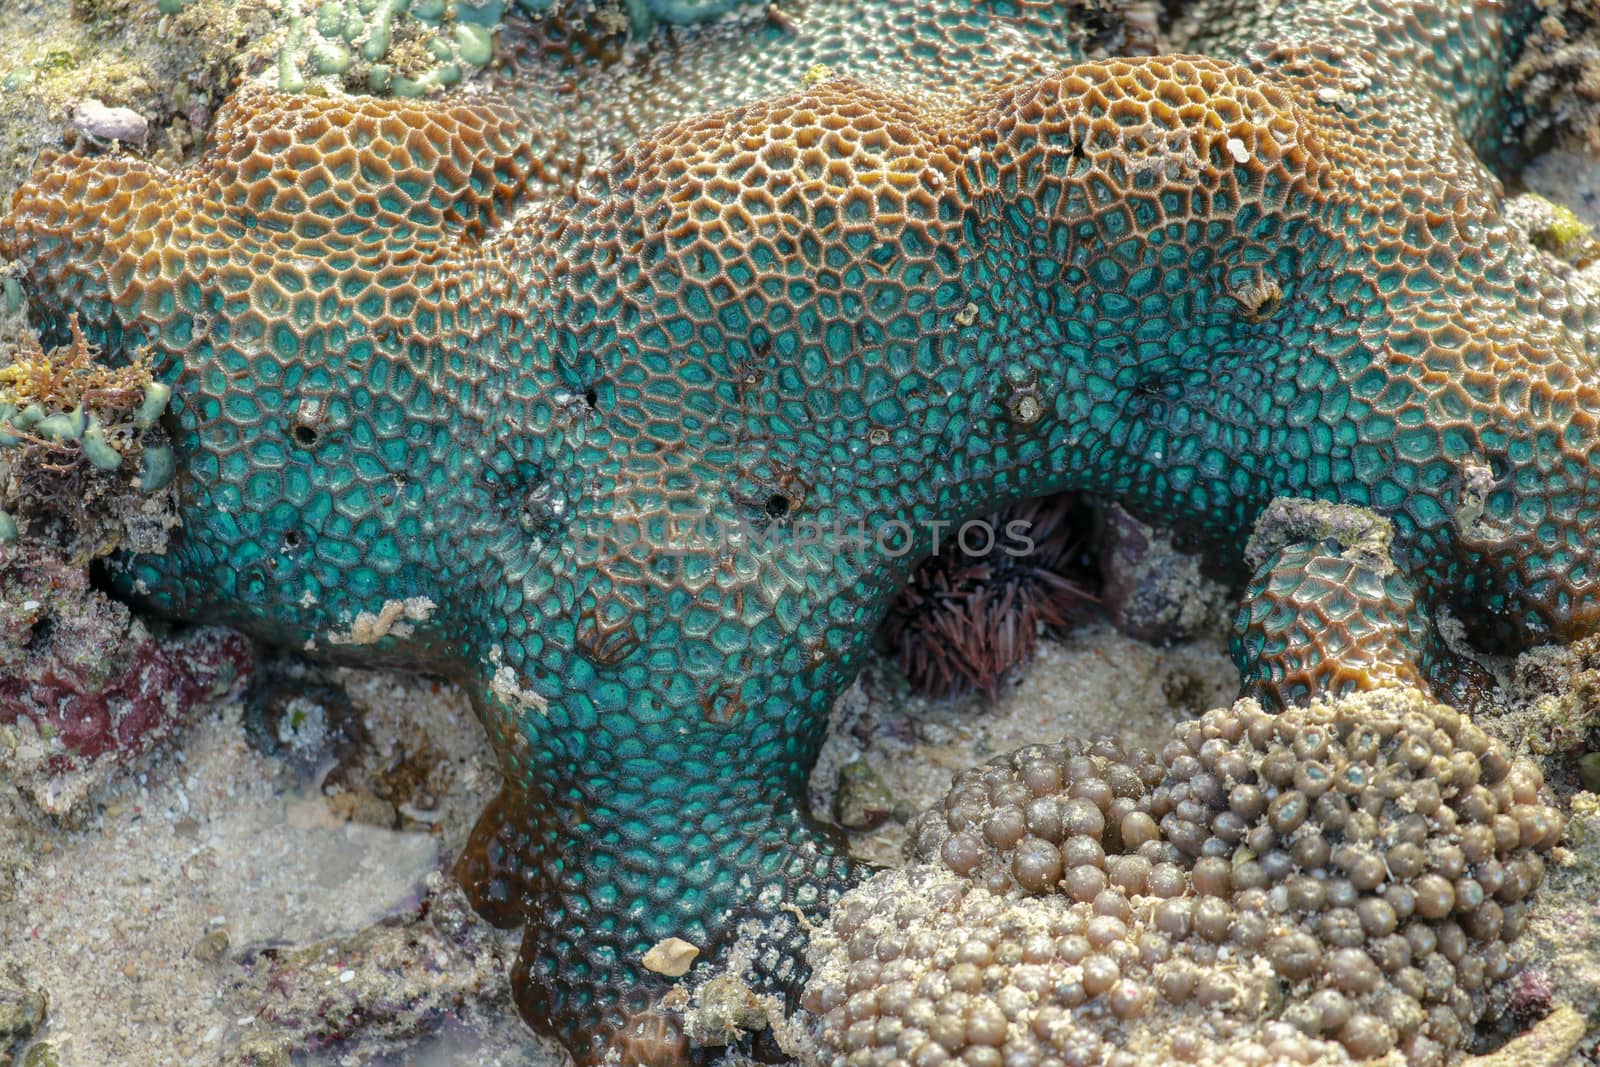 This is a green favia coral with bright red and pink eyes by Sanatana2008